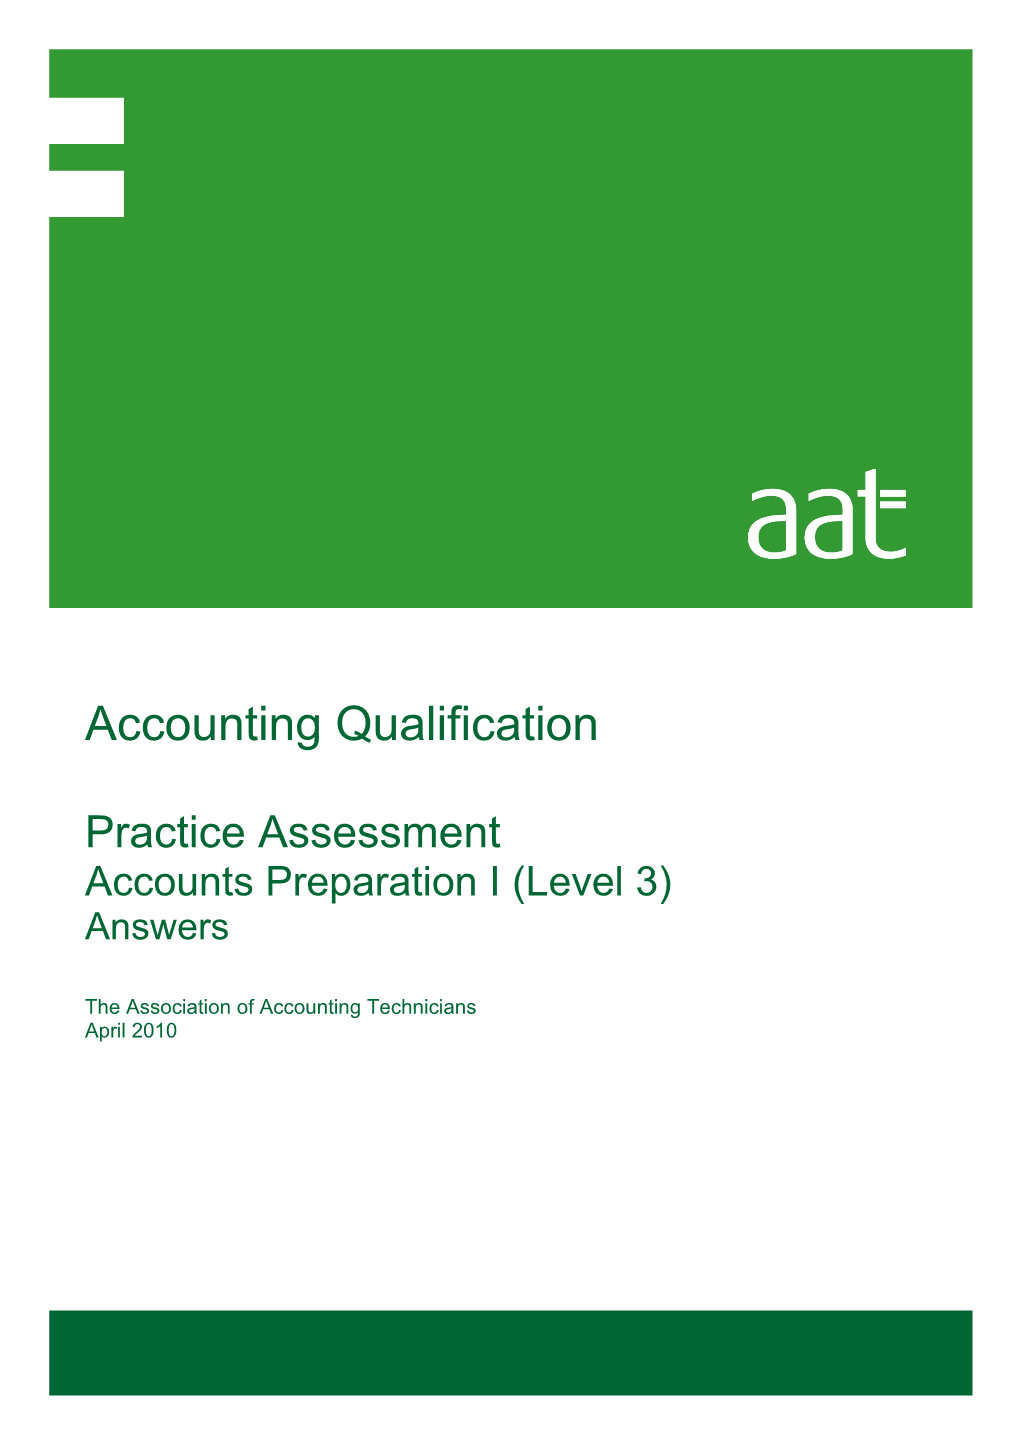 Accounts Preparation I Answers to Sample Assessment